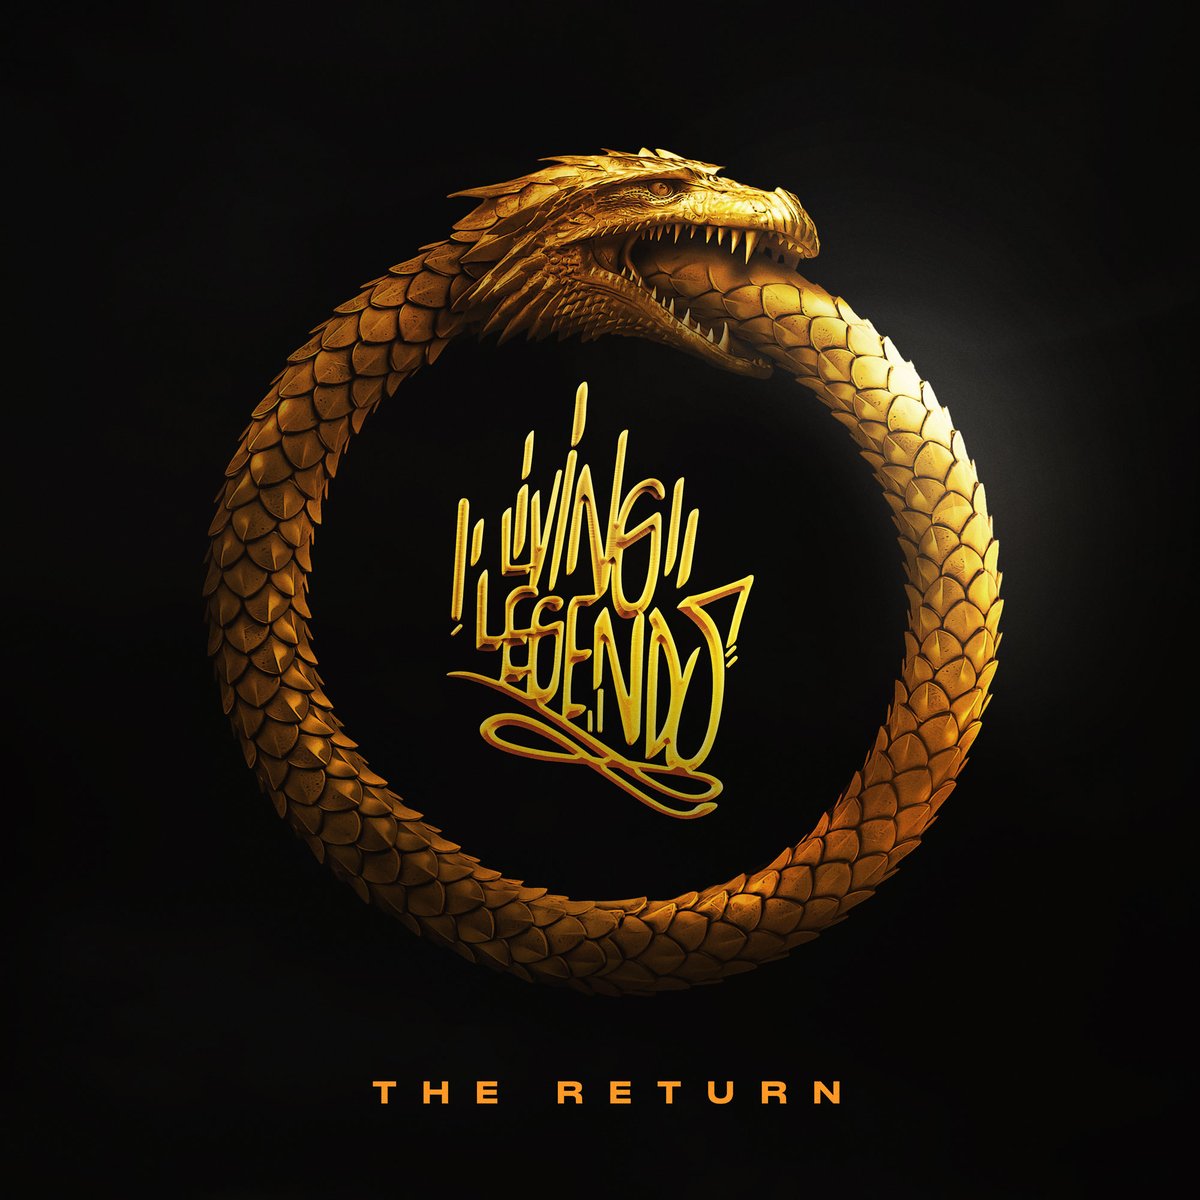 Honored to have been tapped by @eligh and @thegrouch to contribute artwork to one of my favorite hip hop acts of all time, @LivingLegends, on their landmark reunion album, The Return. Milestone achieved.